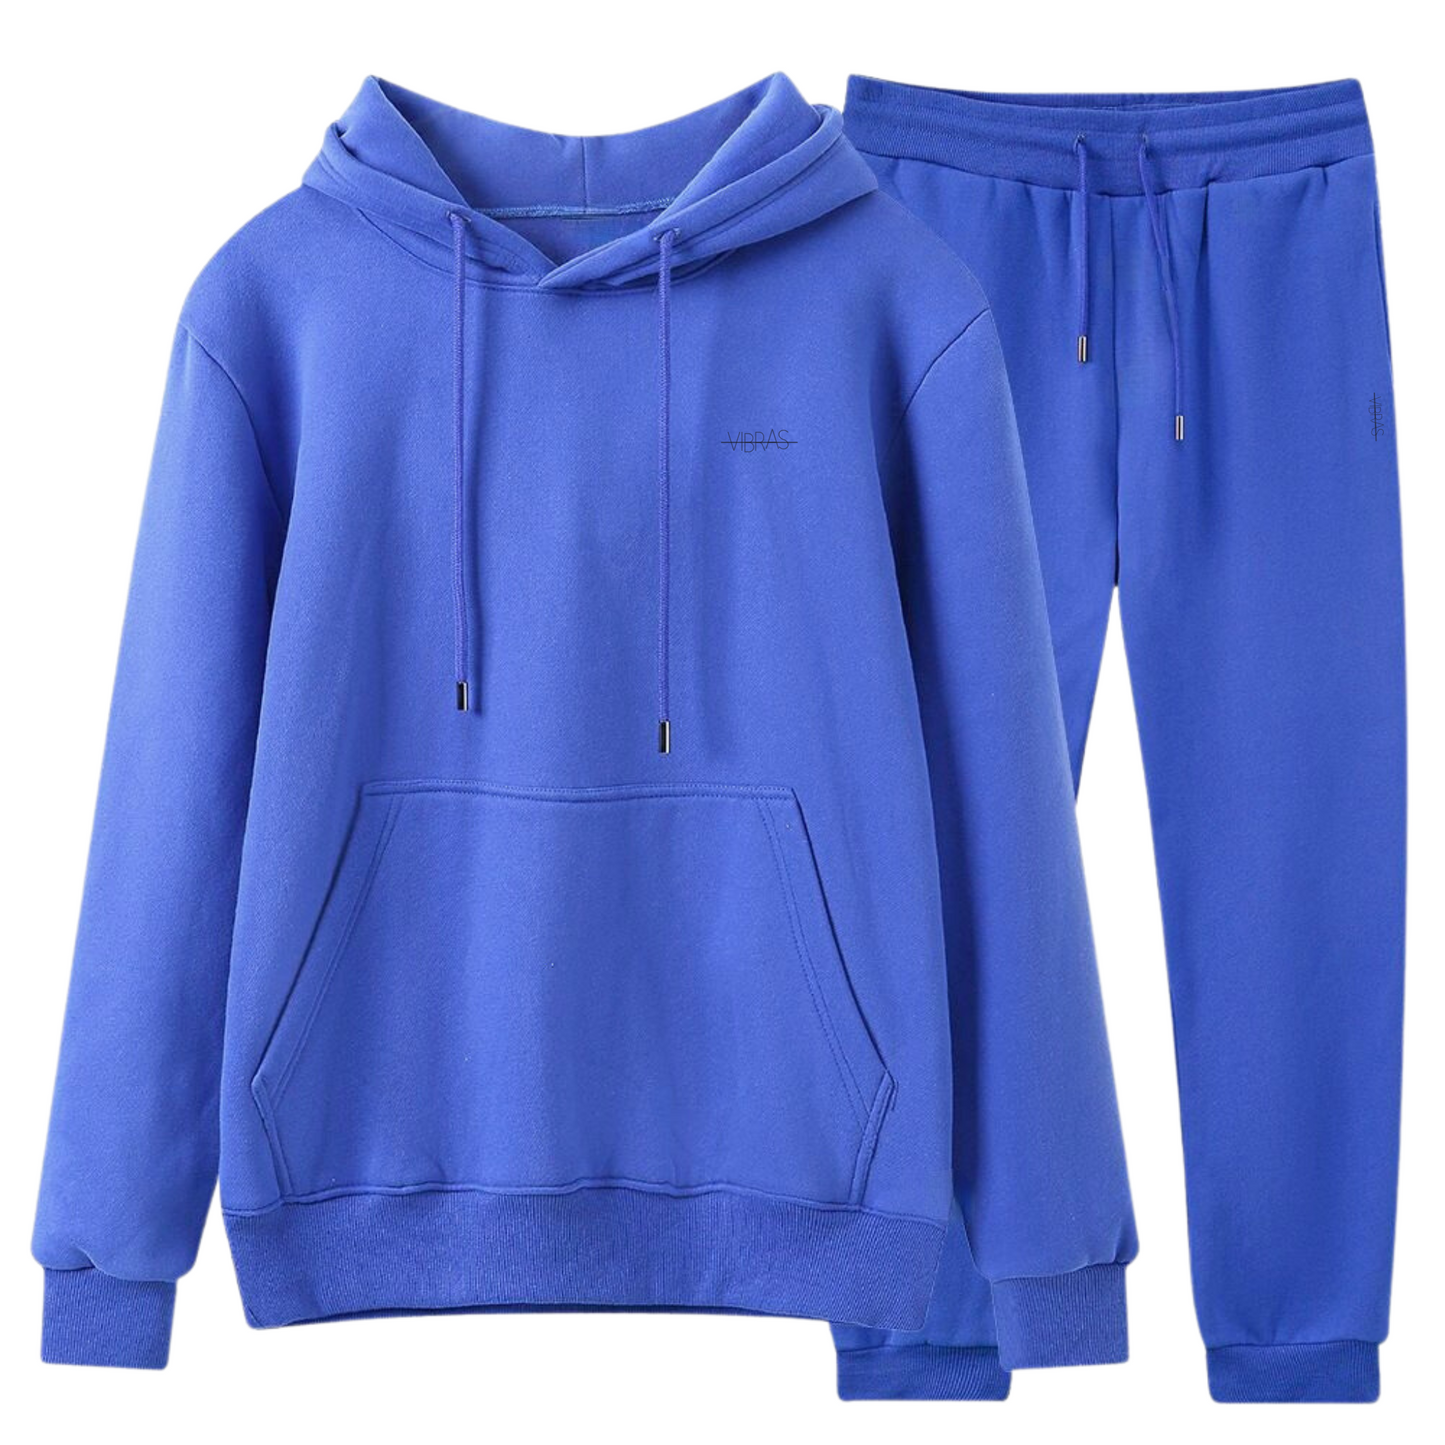 Photo of a cozy and unisex fleece tracksuit set in cobalt blue.